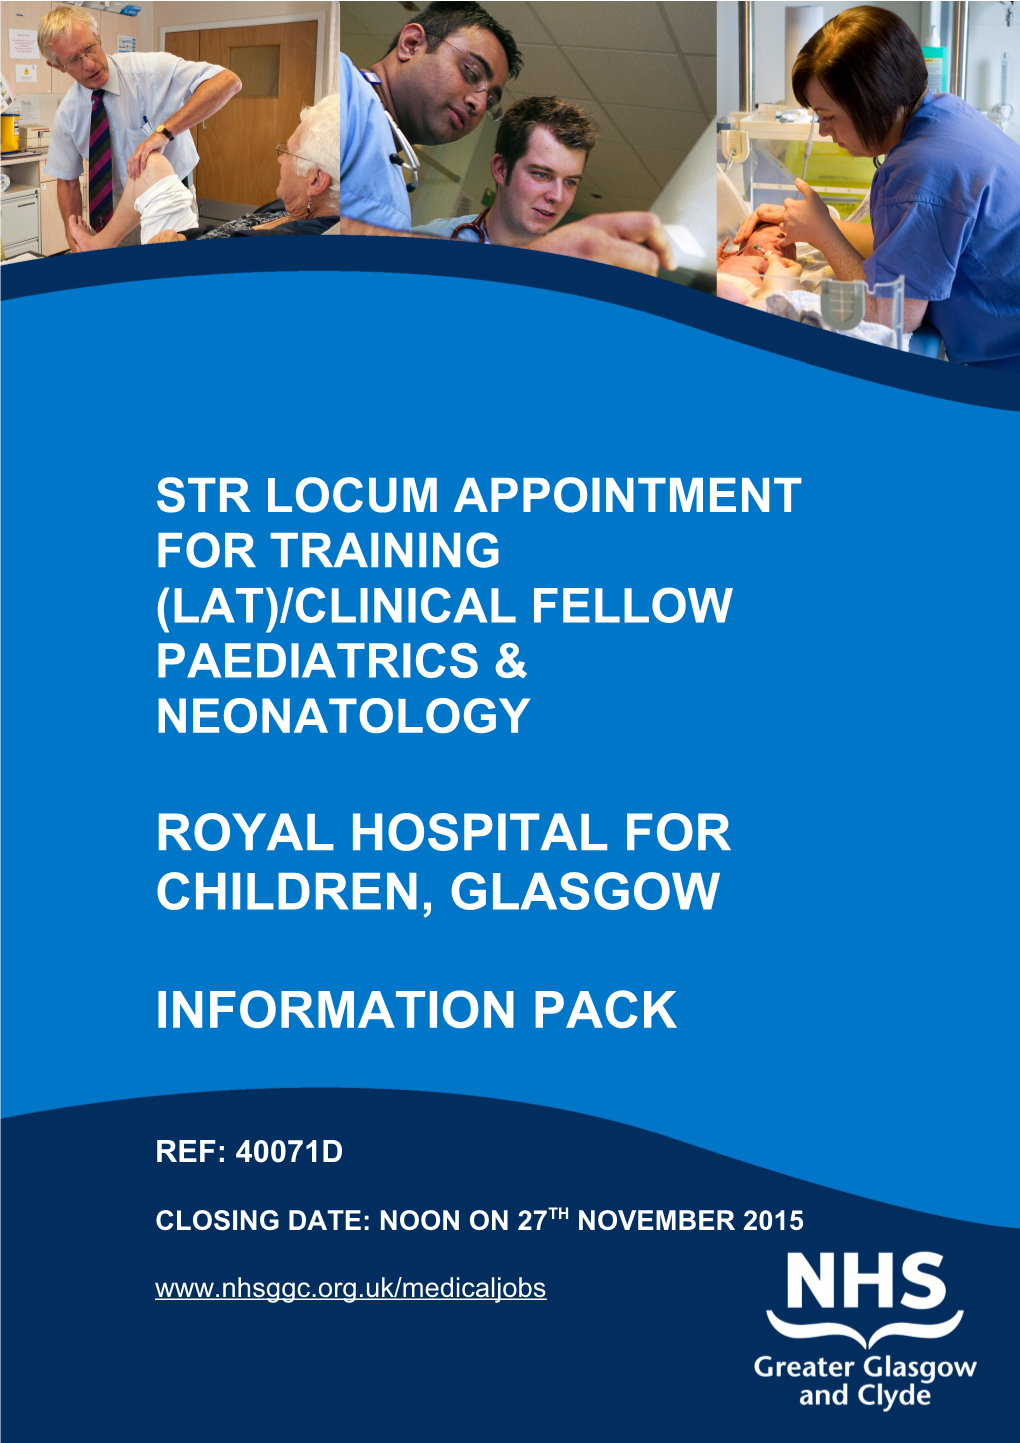 Str Locum Appointment for Training (LAT)/CLINICAL FELLOW Paediatrics& NEONATOLOGY